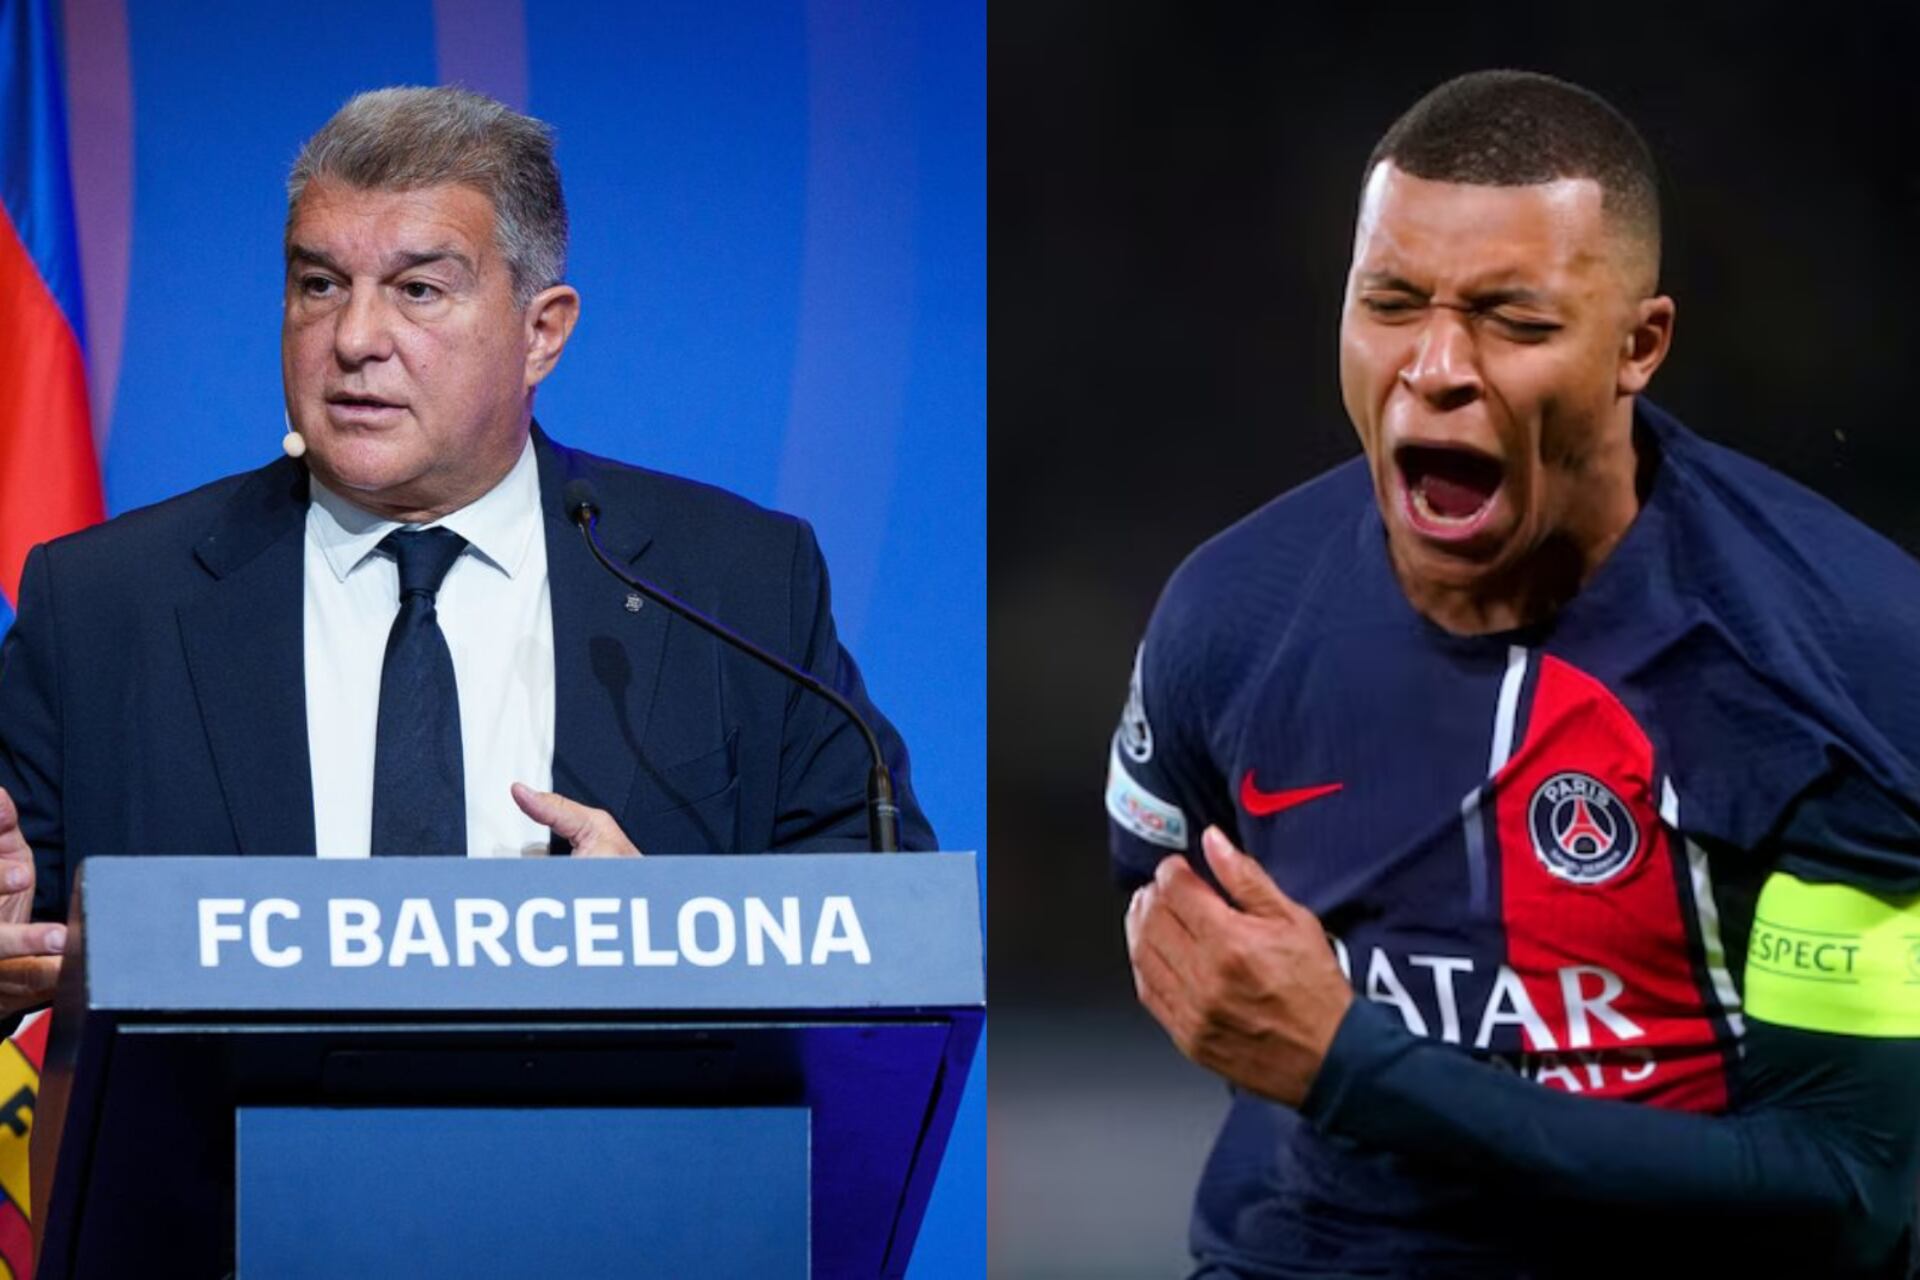 FC Barcelona's Laporta makes this bold statement about Mbappé and PSG players